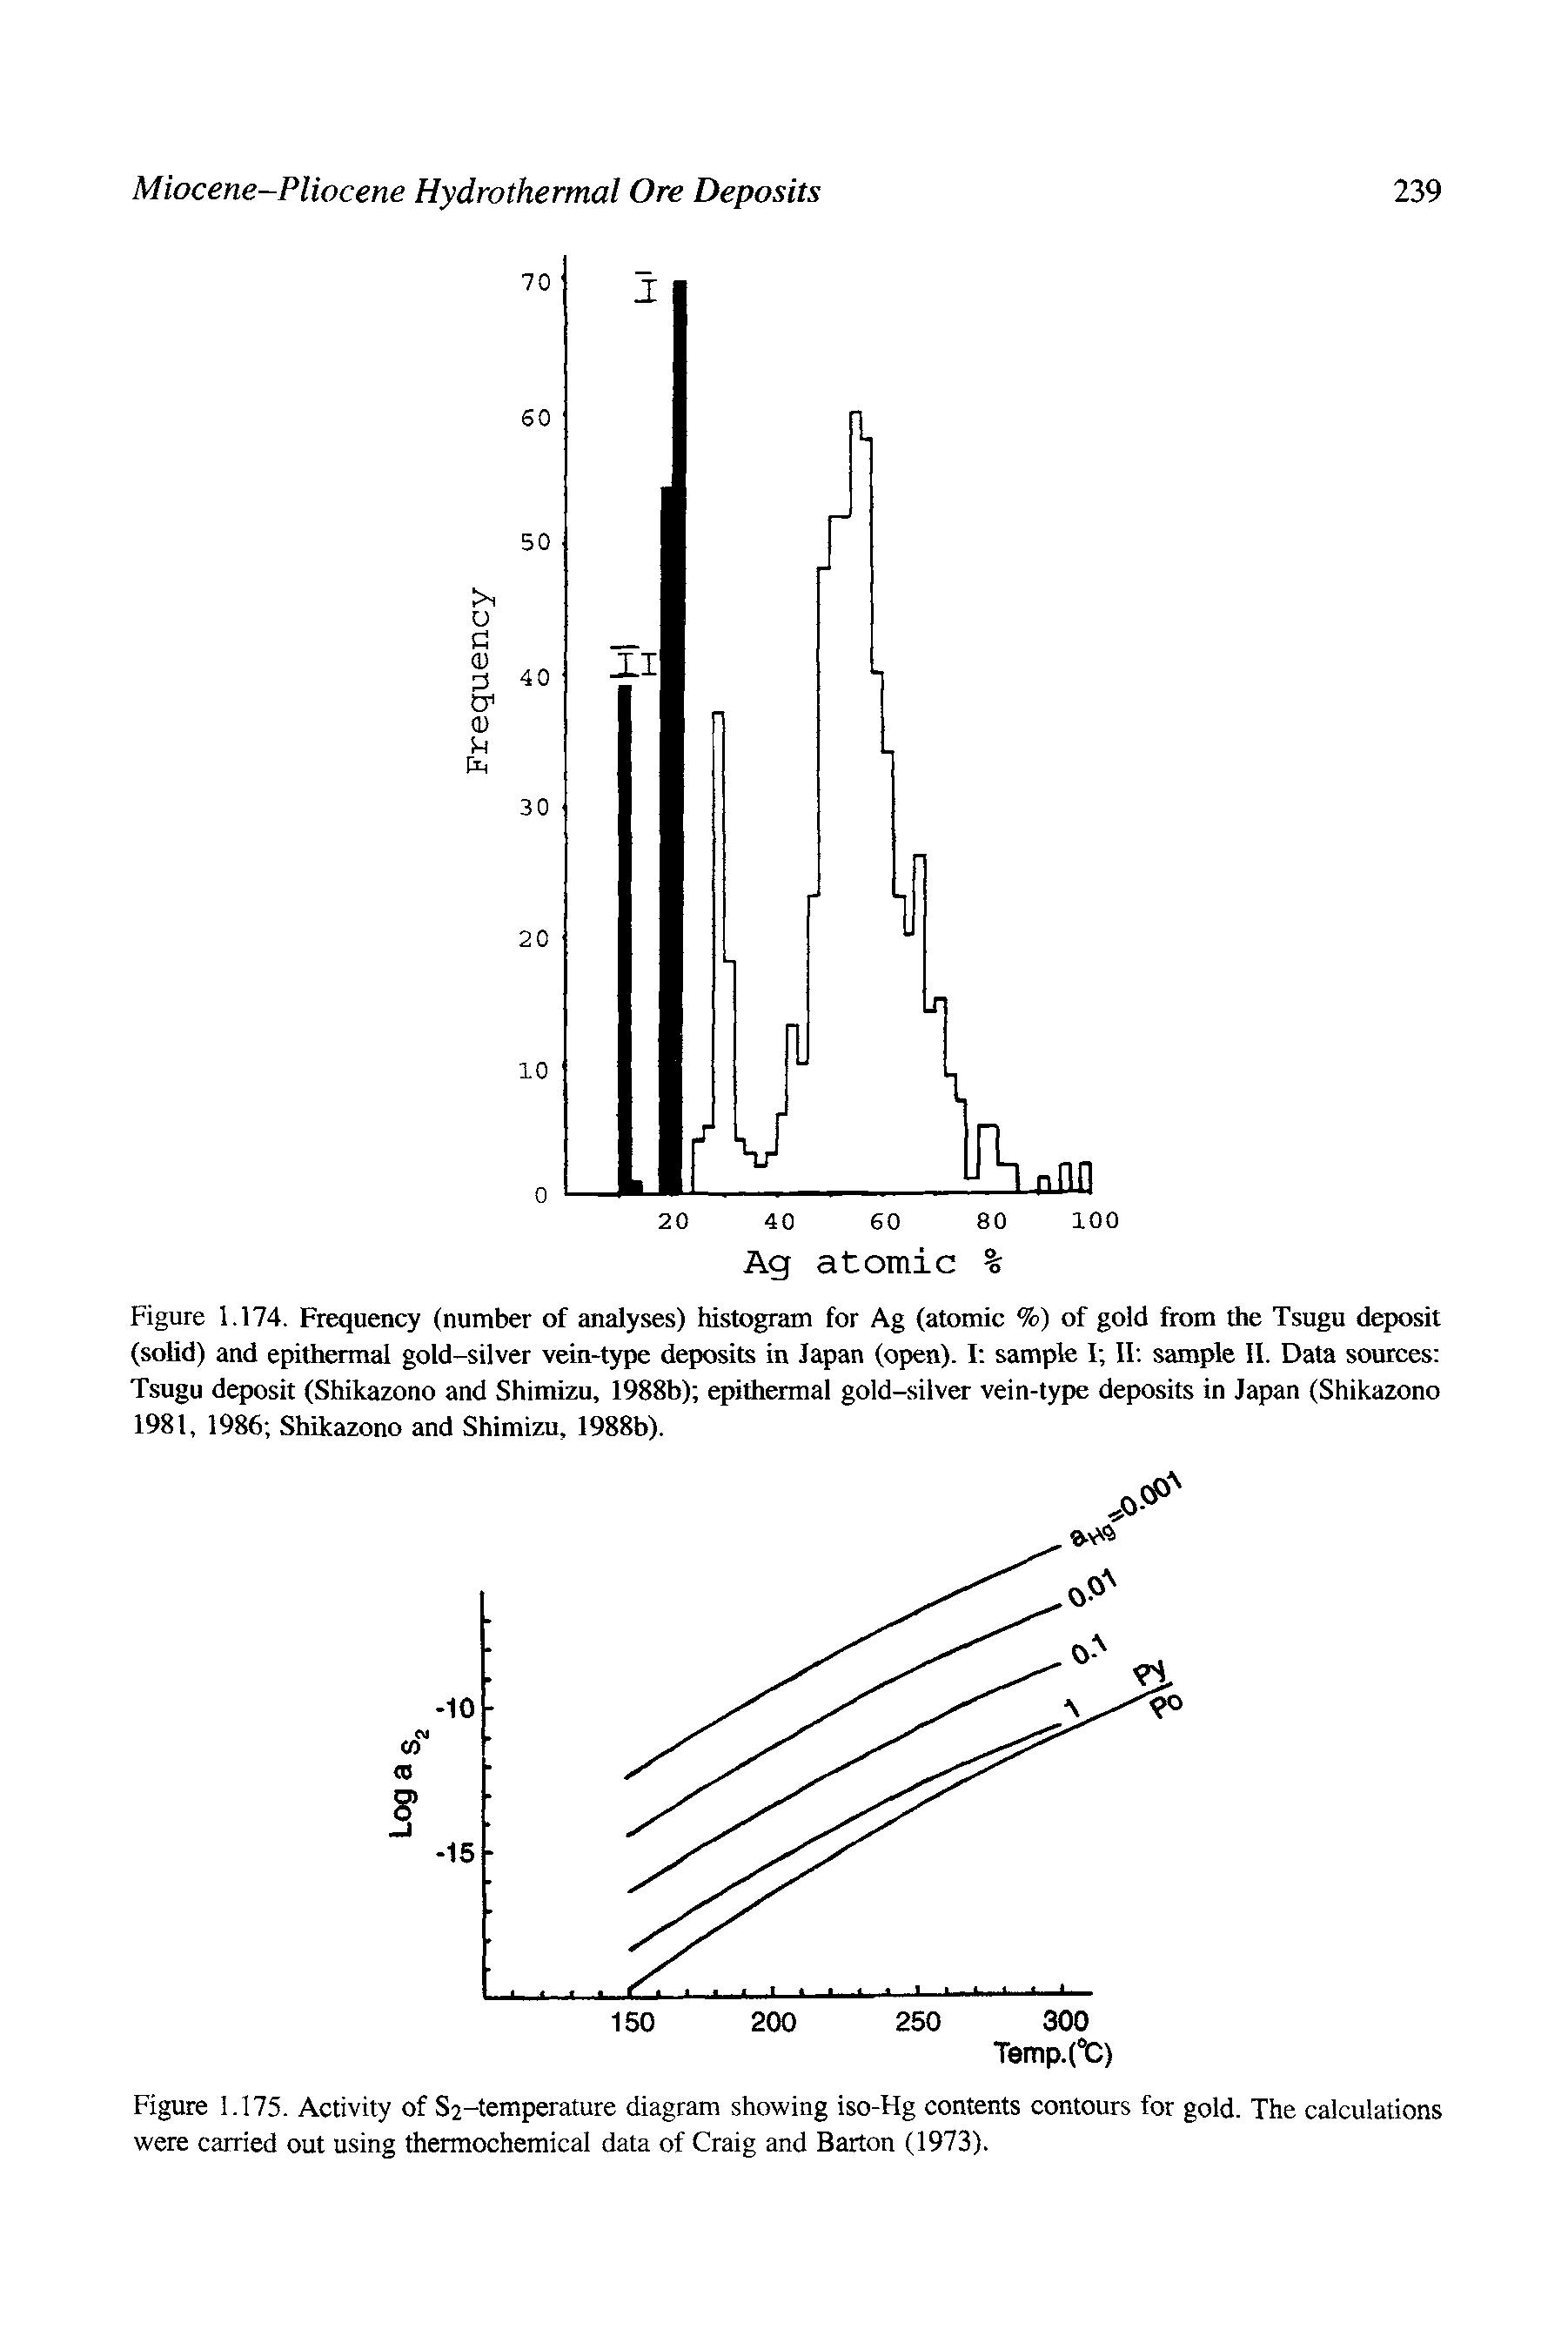 Figure 1.174. Frequency (number of analyses) histogram for Ag (atomic %) of gold from the Tsugu deposit (solid) and epithermal gold-silver vein-type deposits in Japan (open). I sample I II sample II. Data sources Tsugu deposit (Shikazono and Shimizu, 1988b) epithermal gold-silver vein-type deposits in Japan (Shikazono 1981, 1986 Shikazono and Shimizu, 1988b).